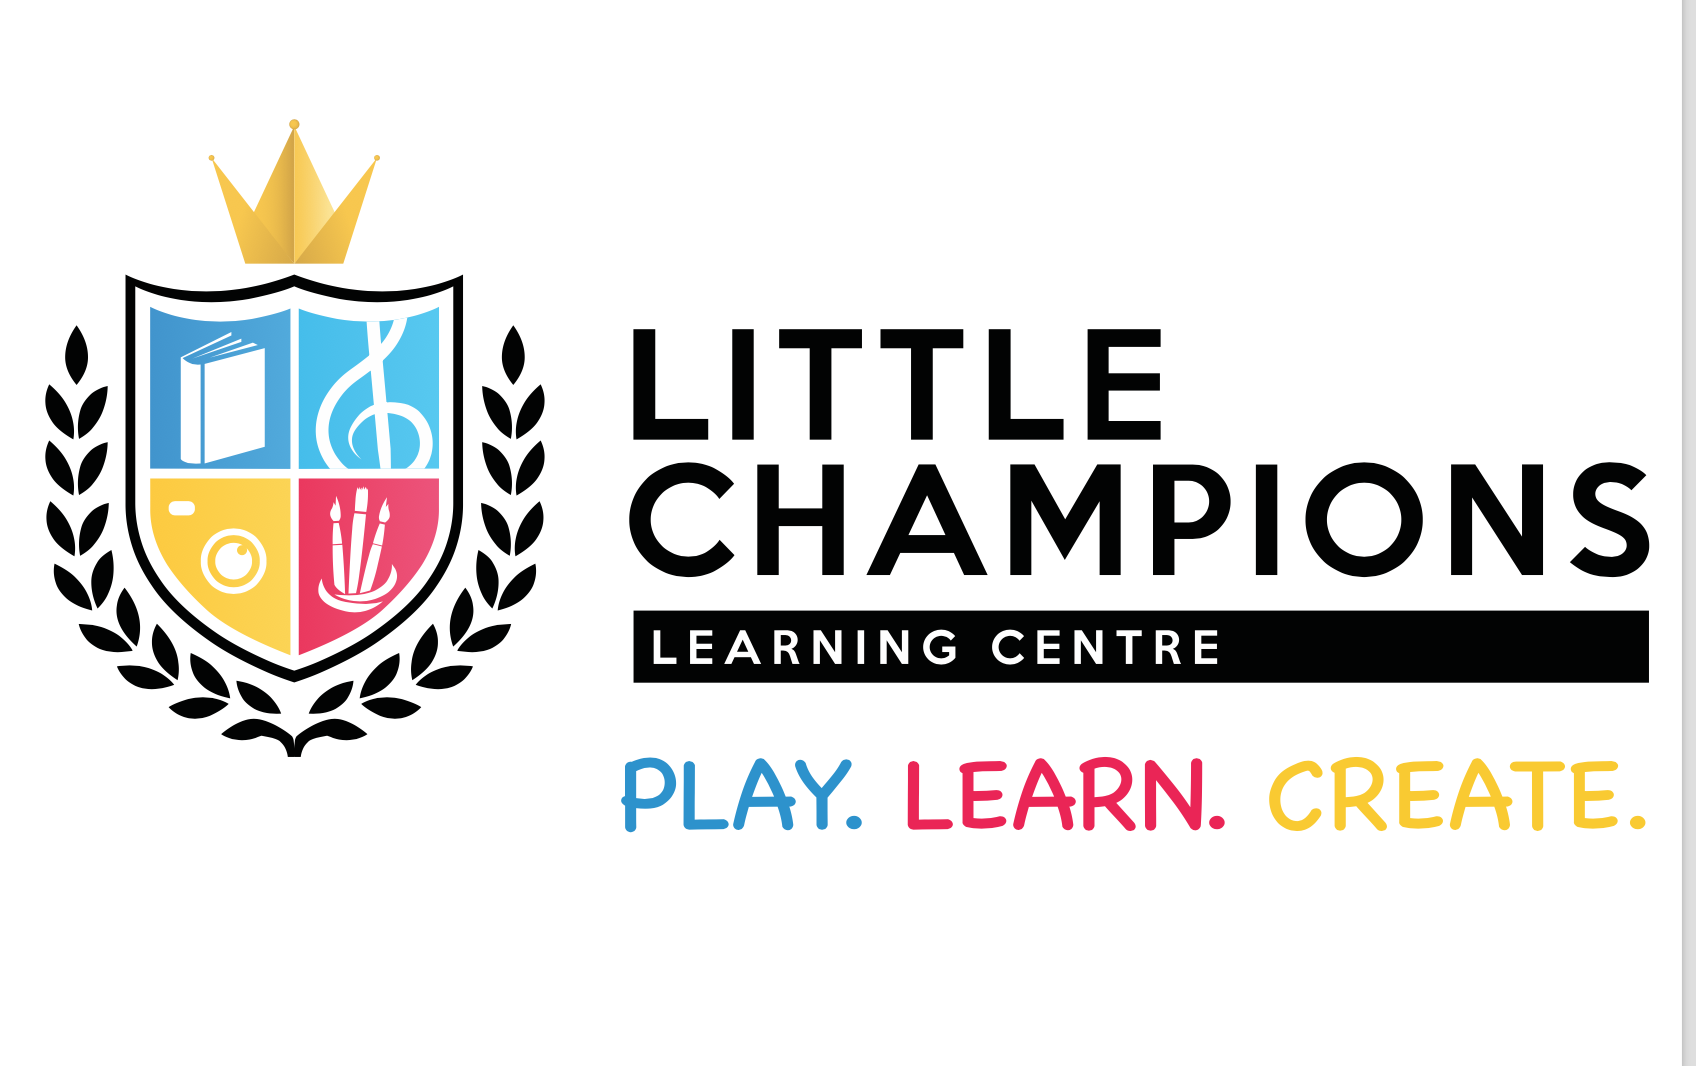 LITTLE CHAMPIONS - LEARNING CENTRE